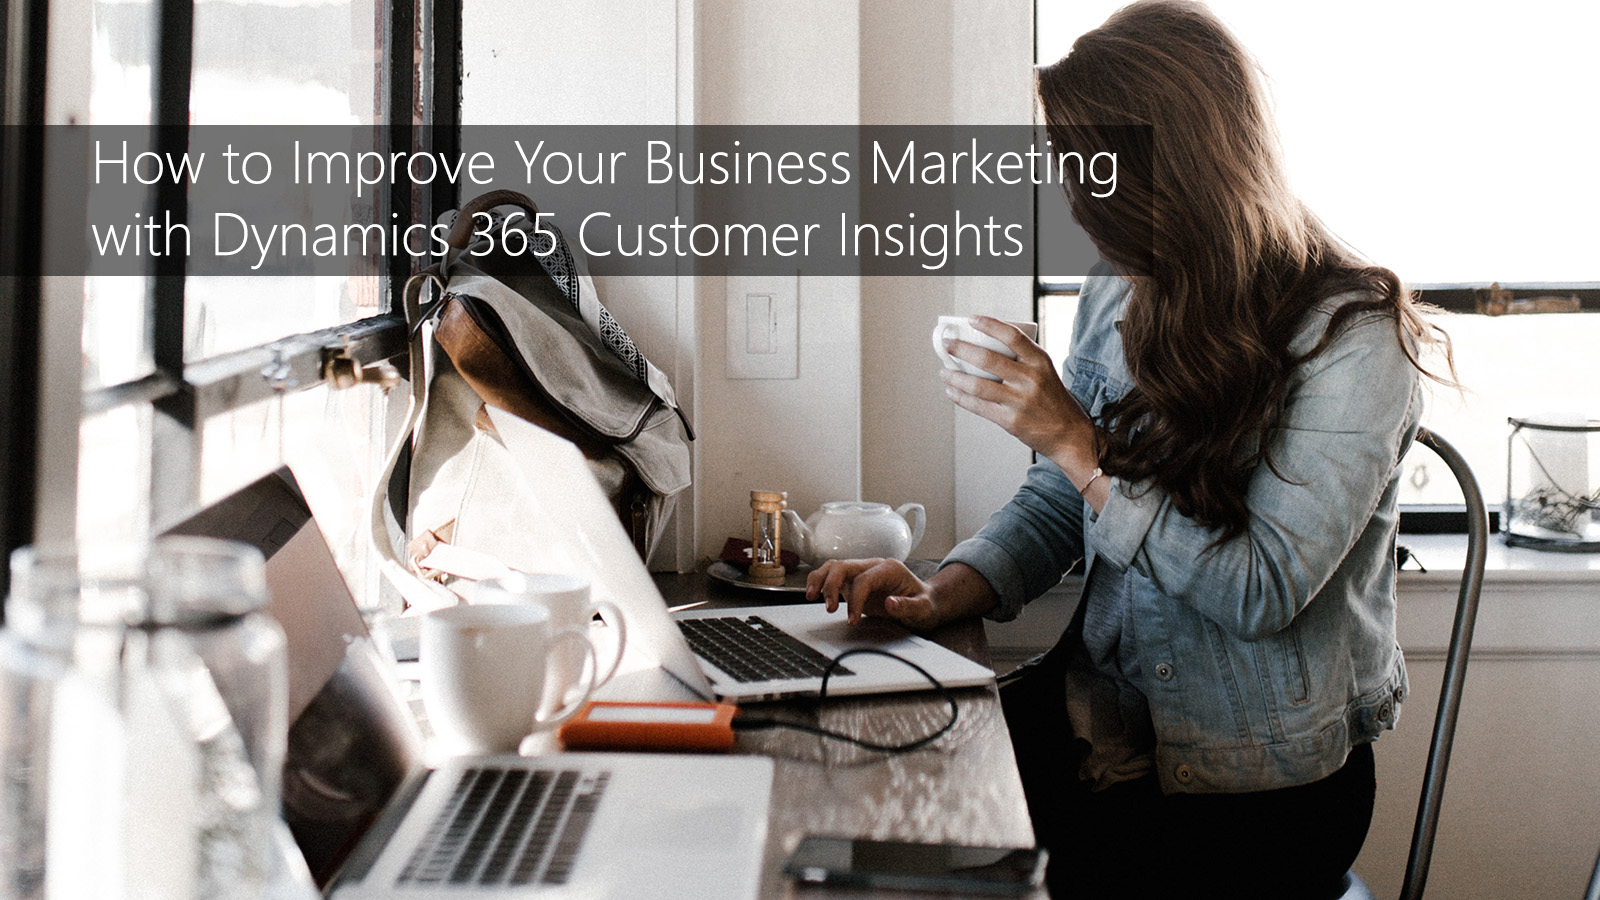 tmc-blog-how-to-improve-your-business-marketing-with-dynamics-365-customer-insights - Copy